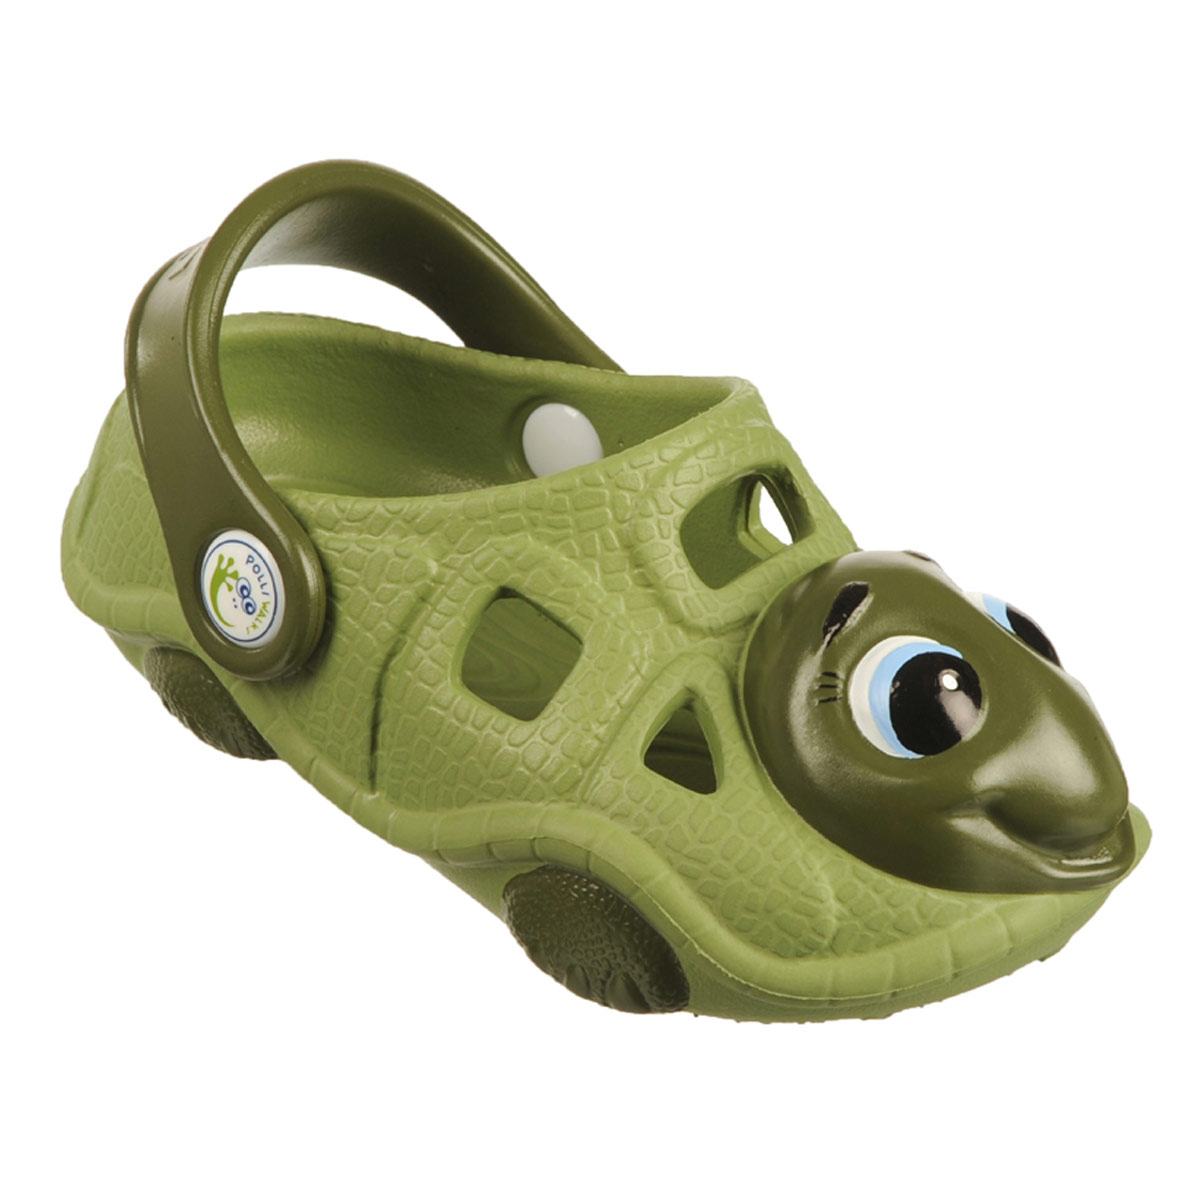 Polliwalks : Toddler shoes Timmy the Turtle Green # 8